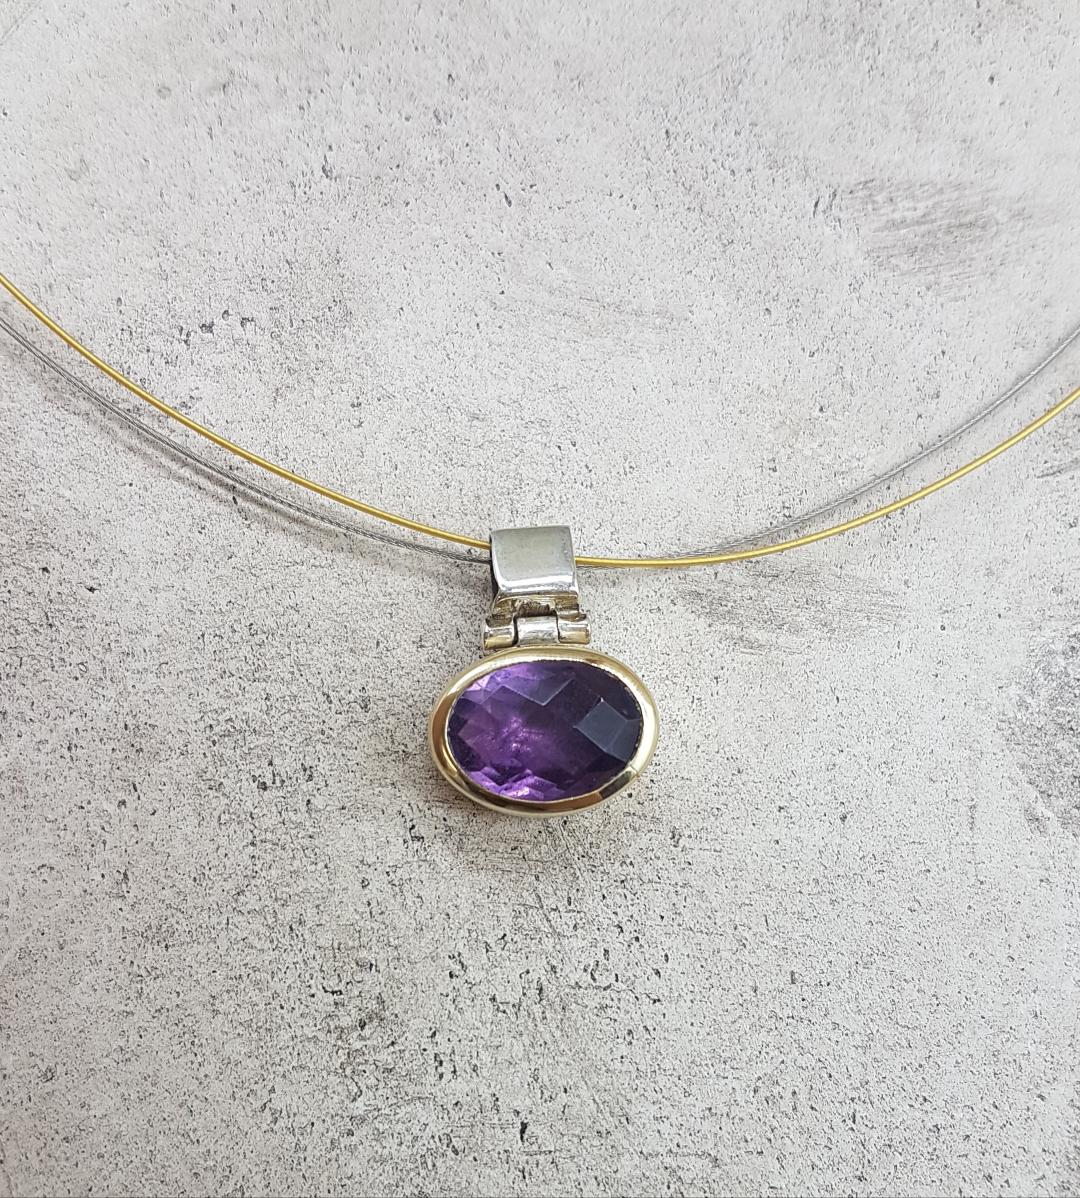 Womens handmade silver and gold pendant made of 925 ° Silver & K18 Gold and natural purple Amethyst.